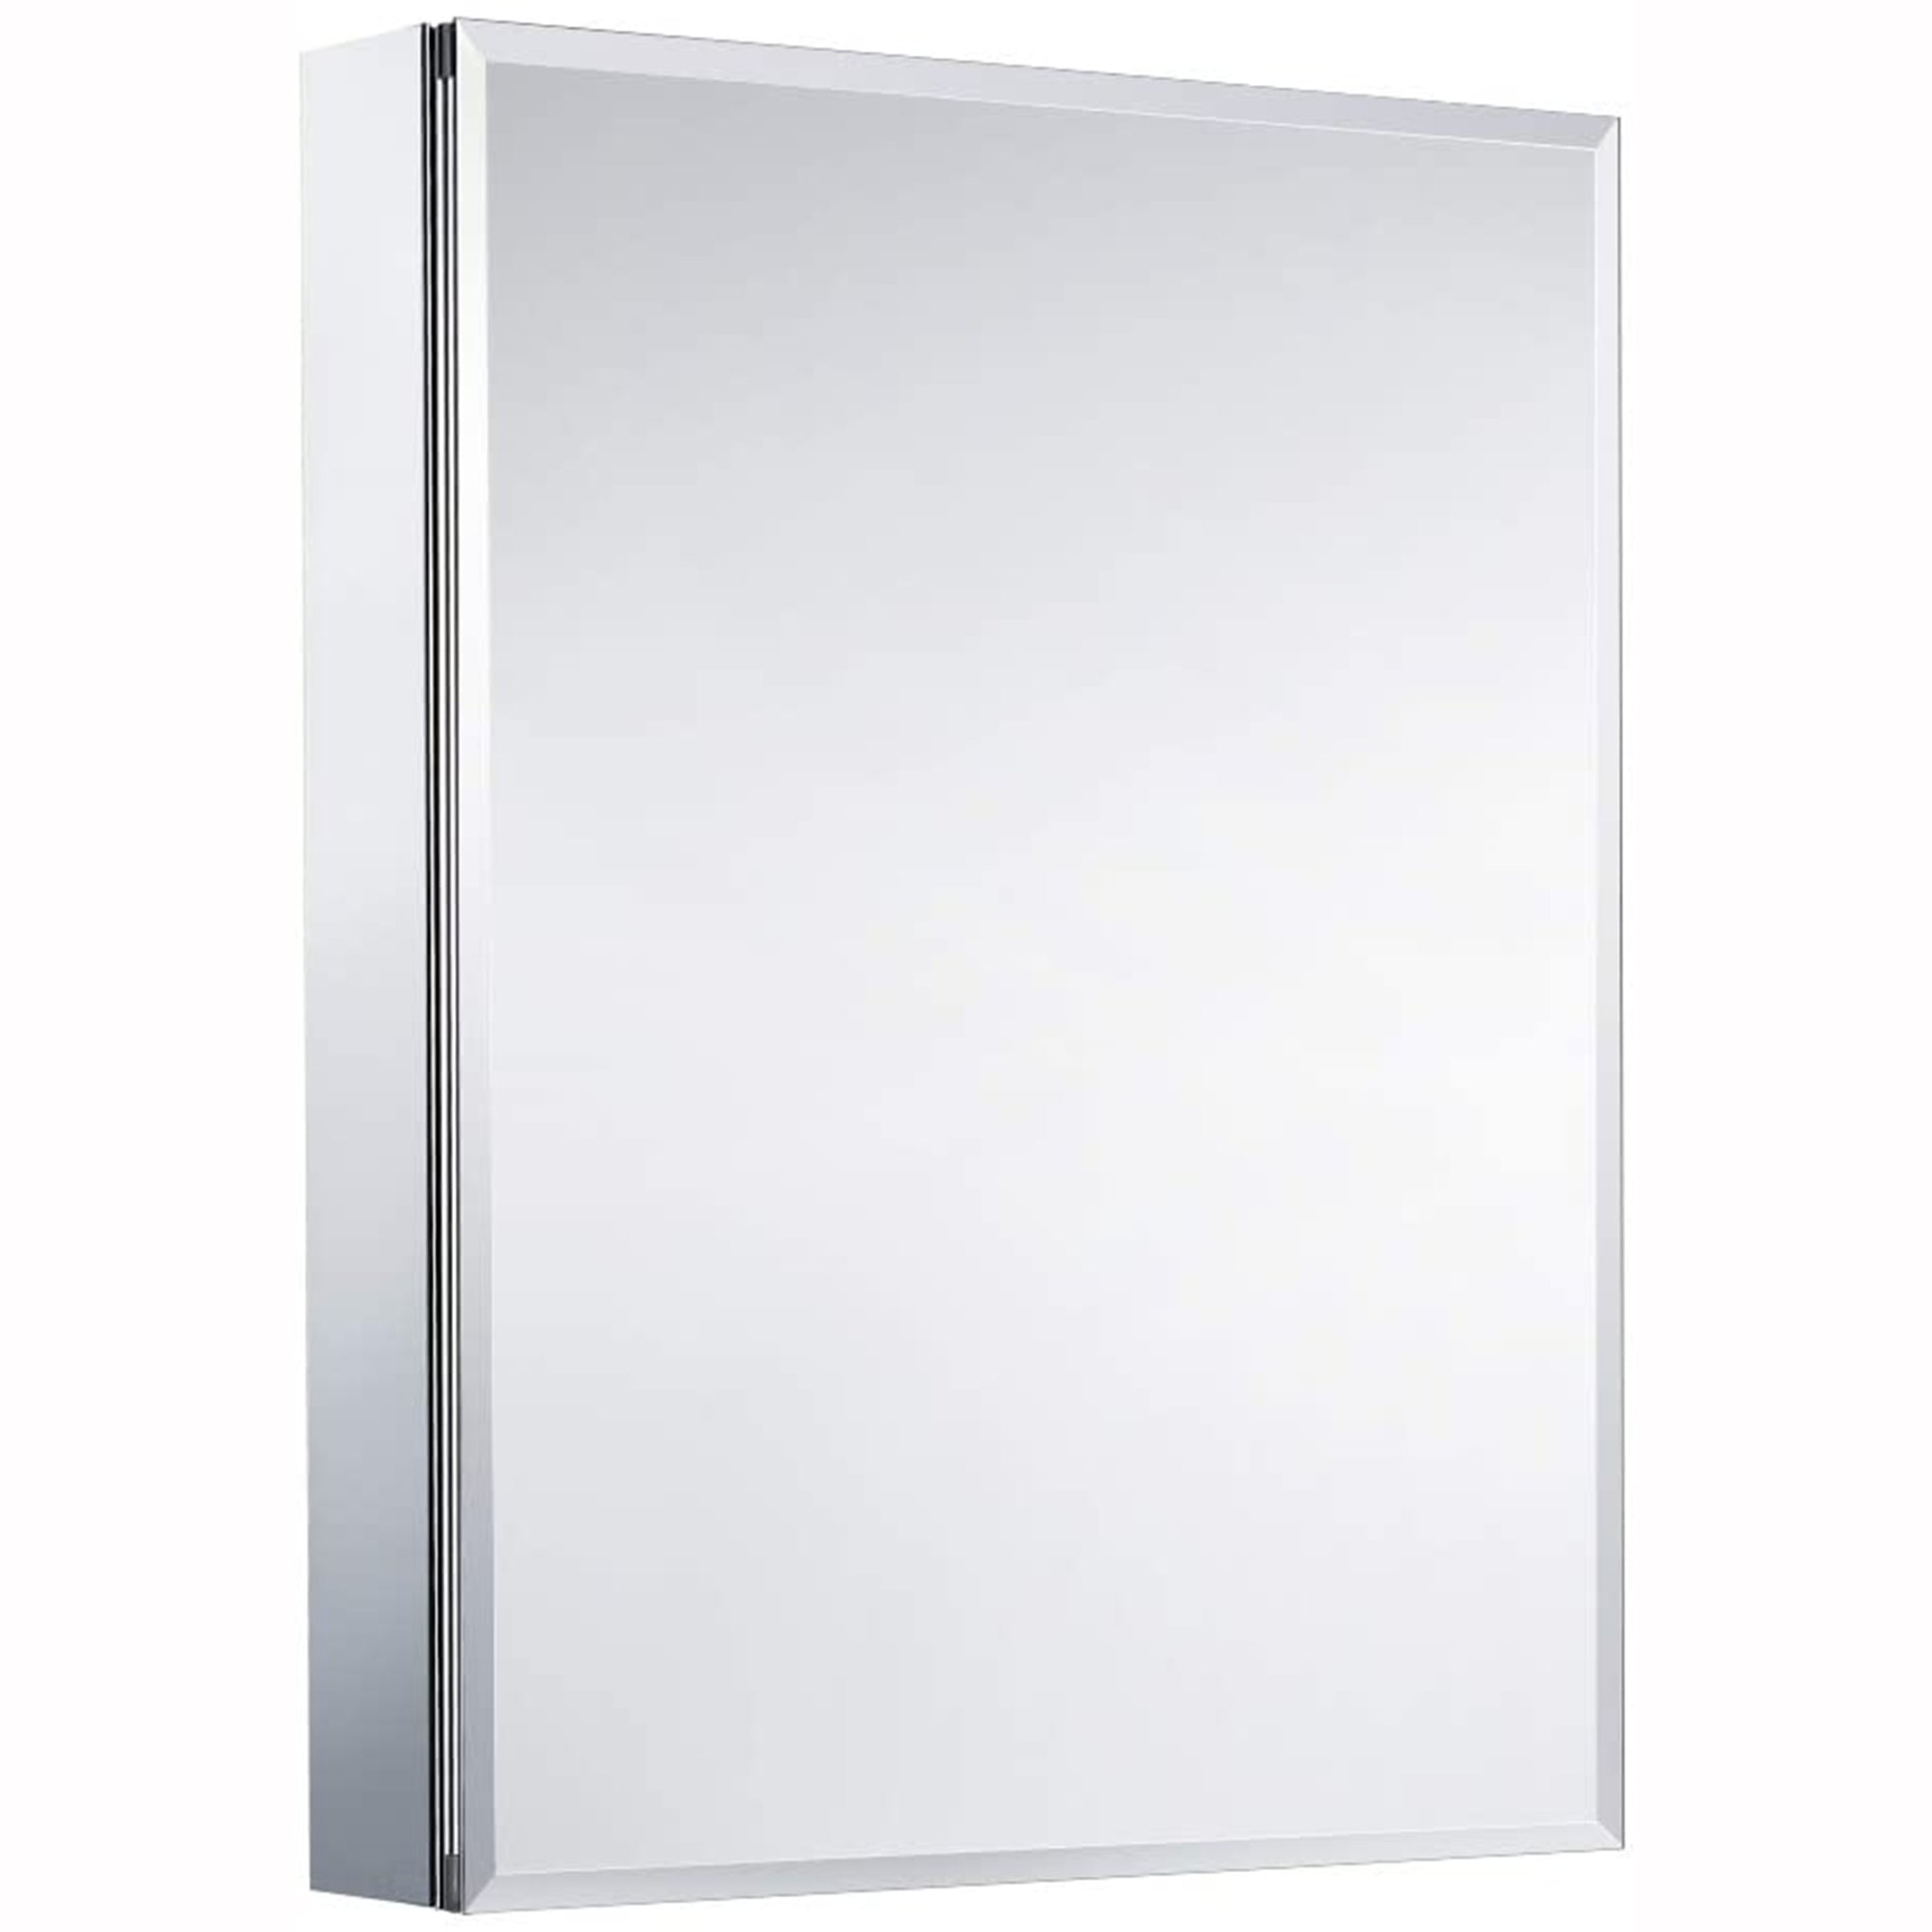 Staykiwi 24 x 30 in. Rectangular Silver Aluminum Recessed/Surface Mount Medicine Cabinet with Mirror